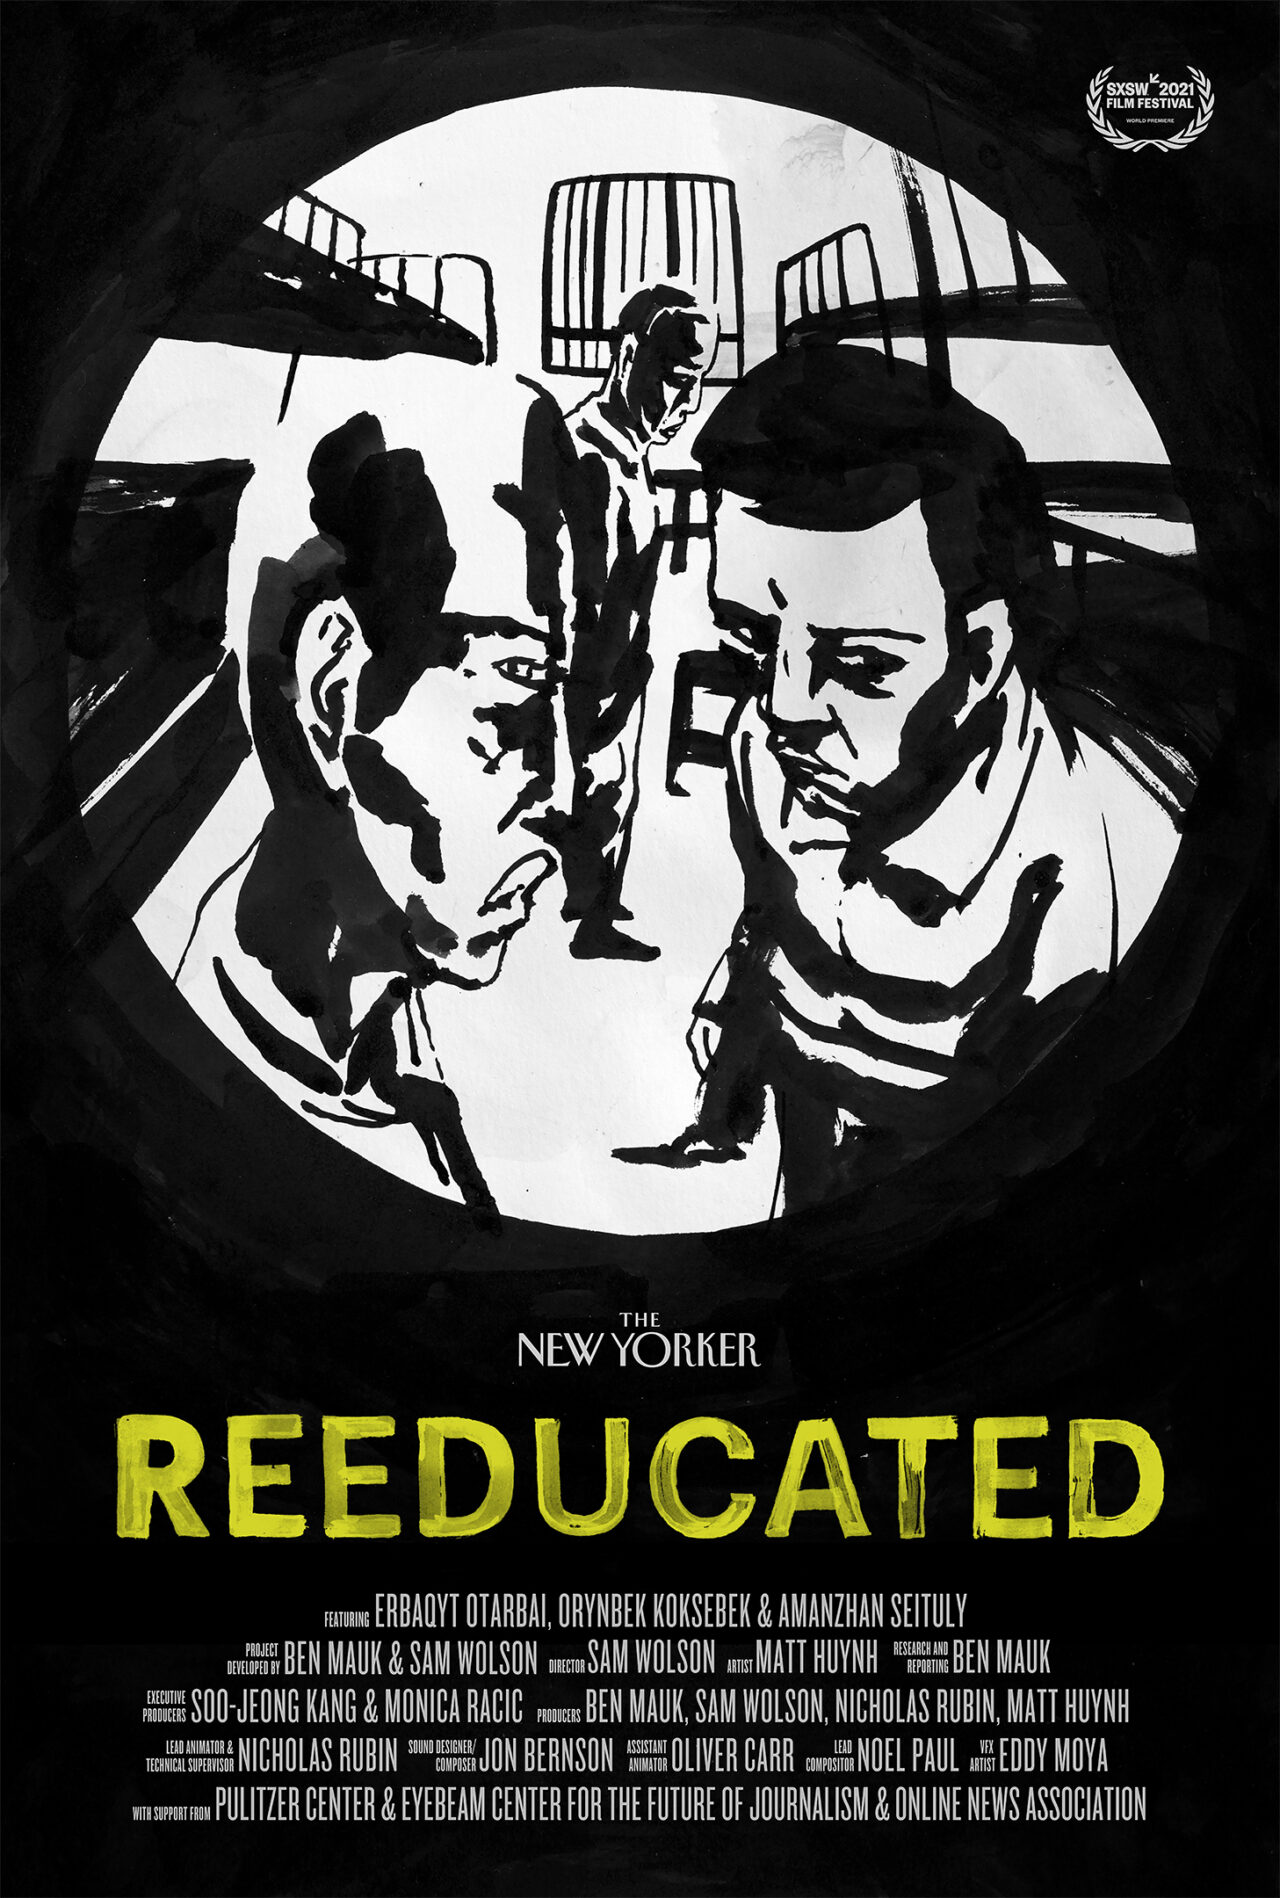 Graphic depiction of Uigher men in a detention camp with the SXSW film festival in the top right corner and the name of the film, Reeducated, in yellow at the bottom.